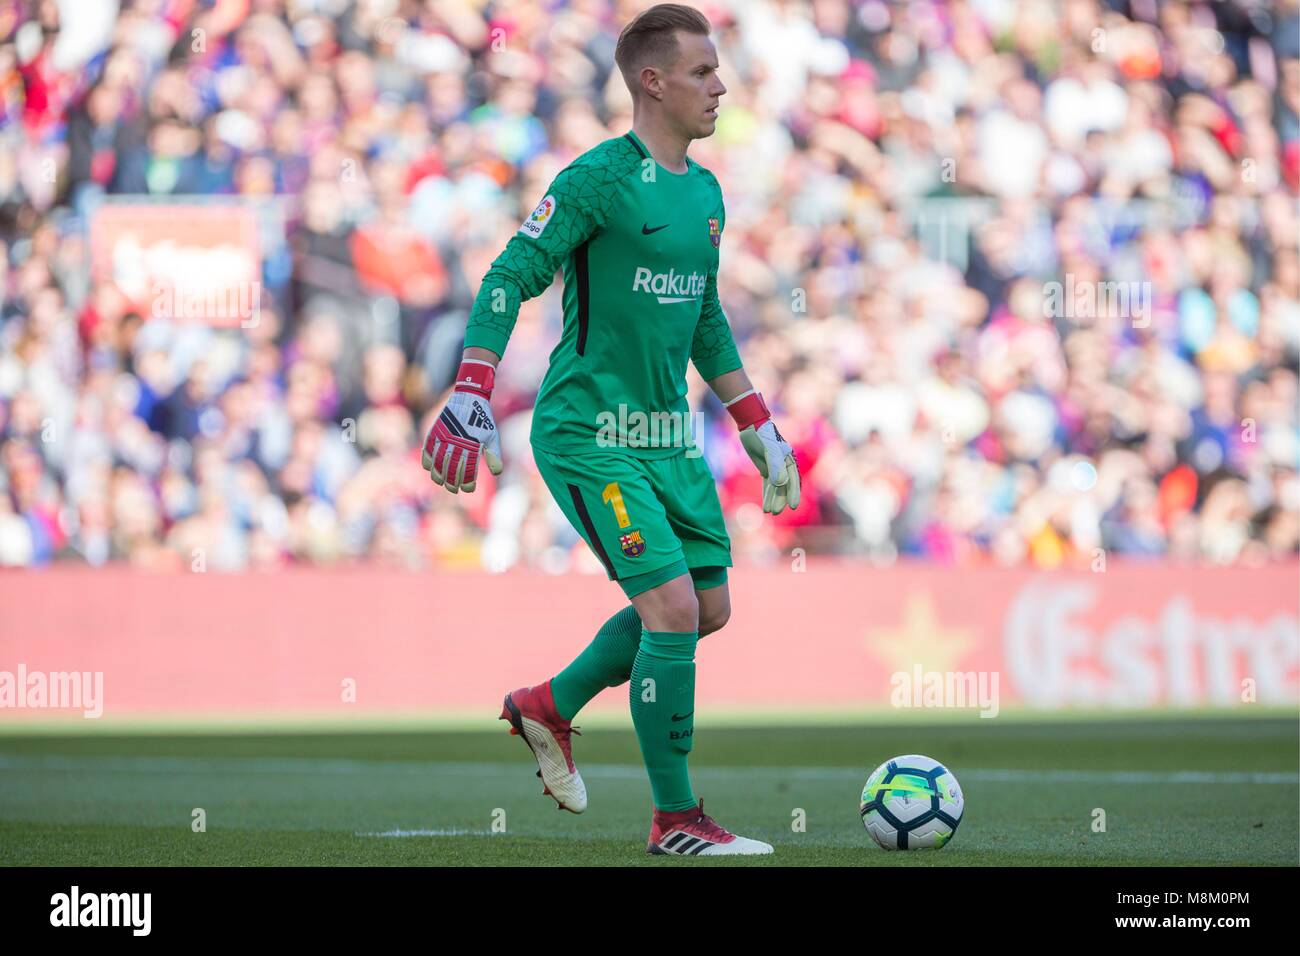 SPAIN - 18th of March: FC Barcelona goalkeeper Marc-Andre ter Stegen (1) during the match between FC Barcelona against Athletic de Bilbao for the round 29 of the Liga Santander, played at Camp Nou Stadium on 18th March 2018 in Barcelona, Spain. (Credit: Urbanandsport / Cordon Press)  Cordon Press Stock Photo